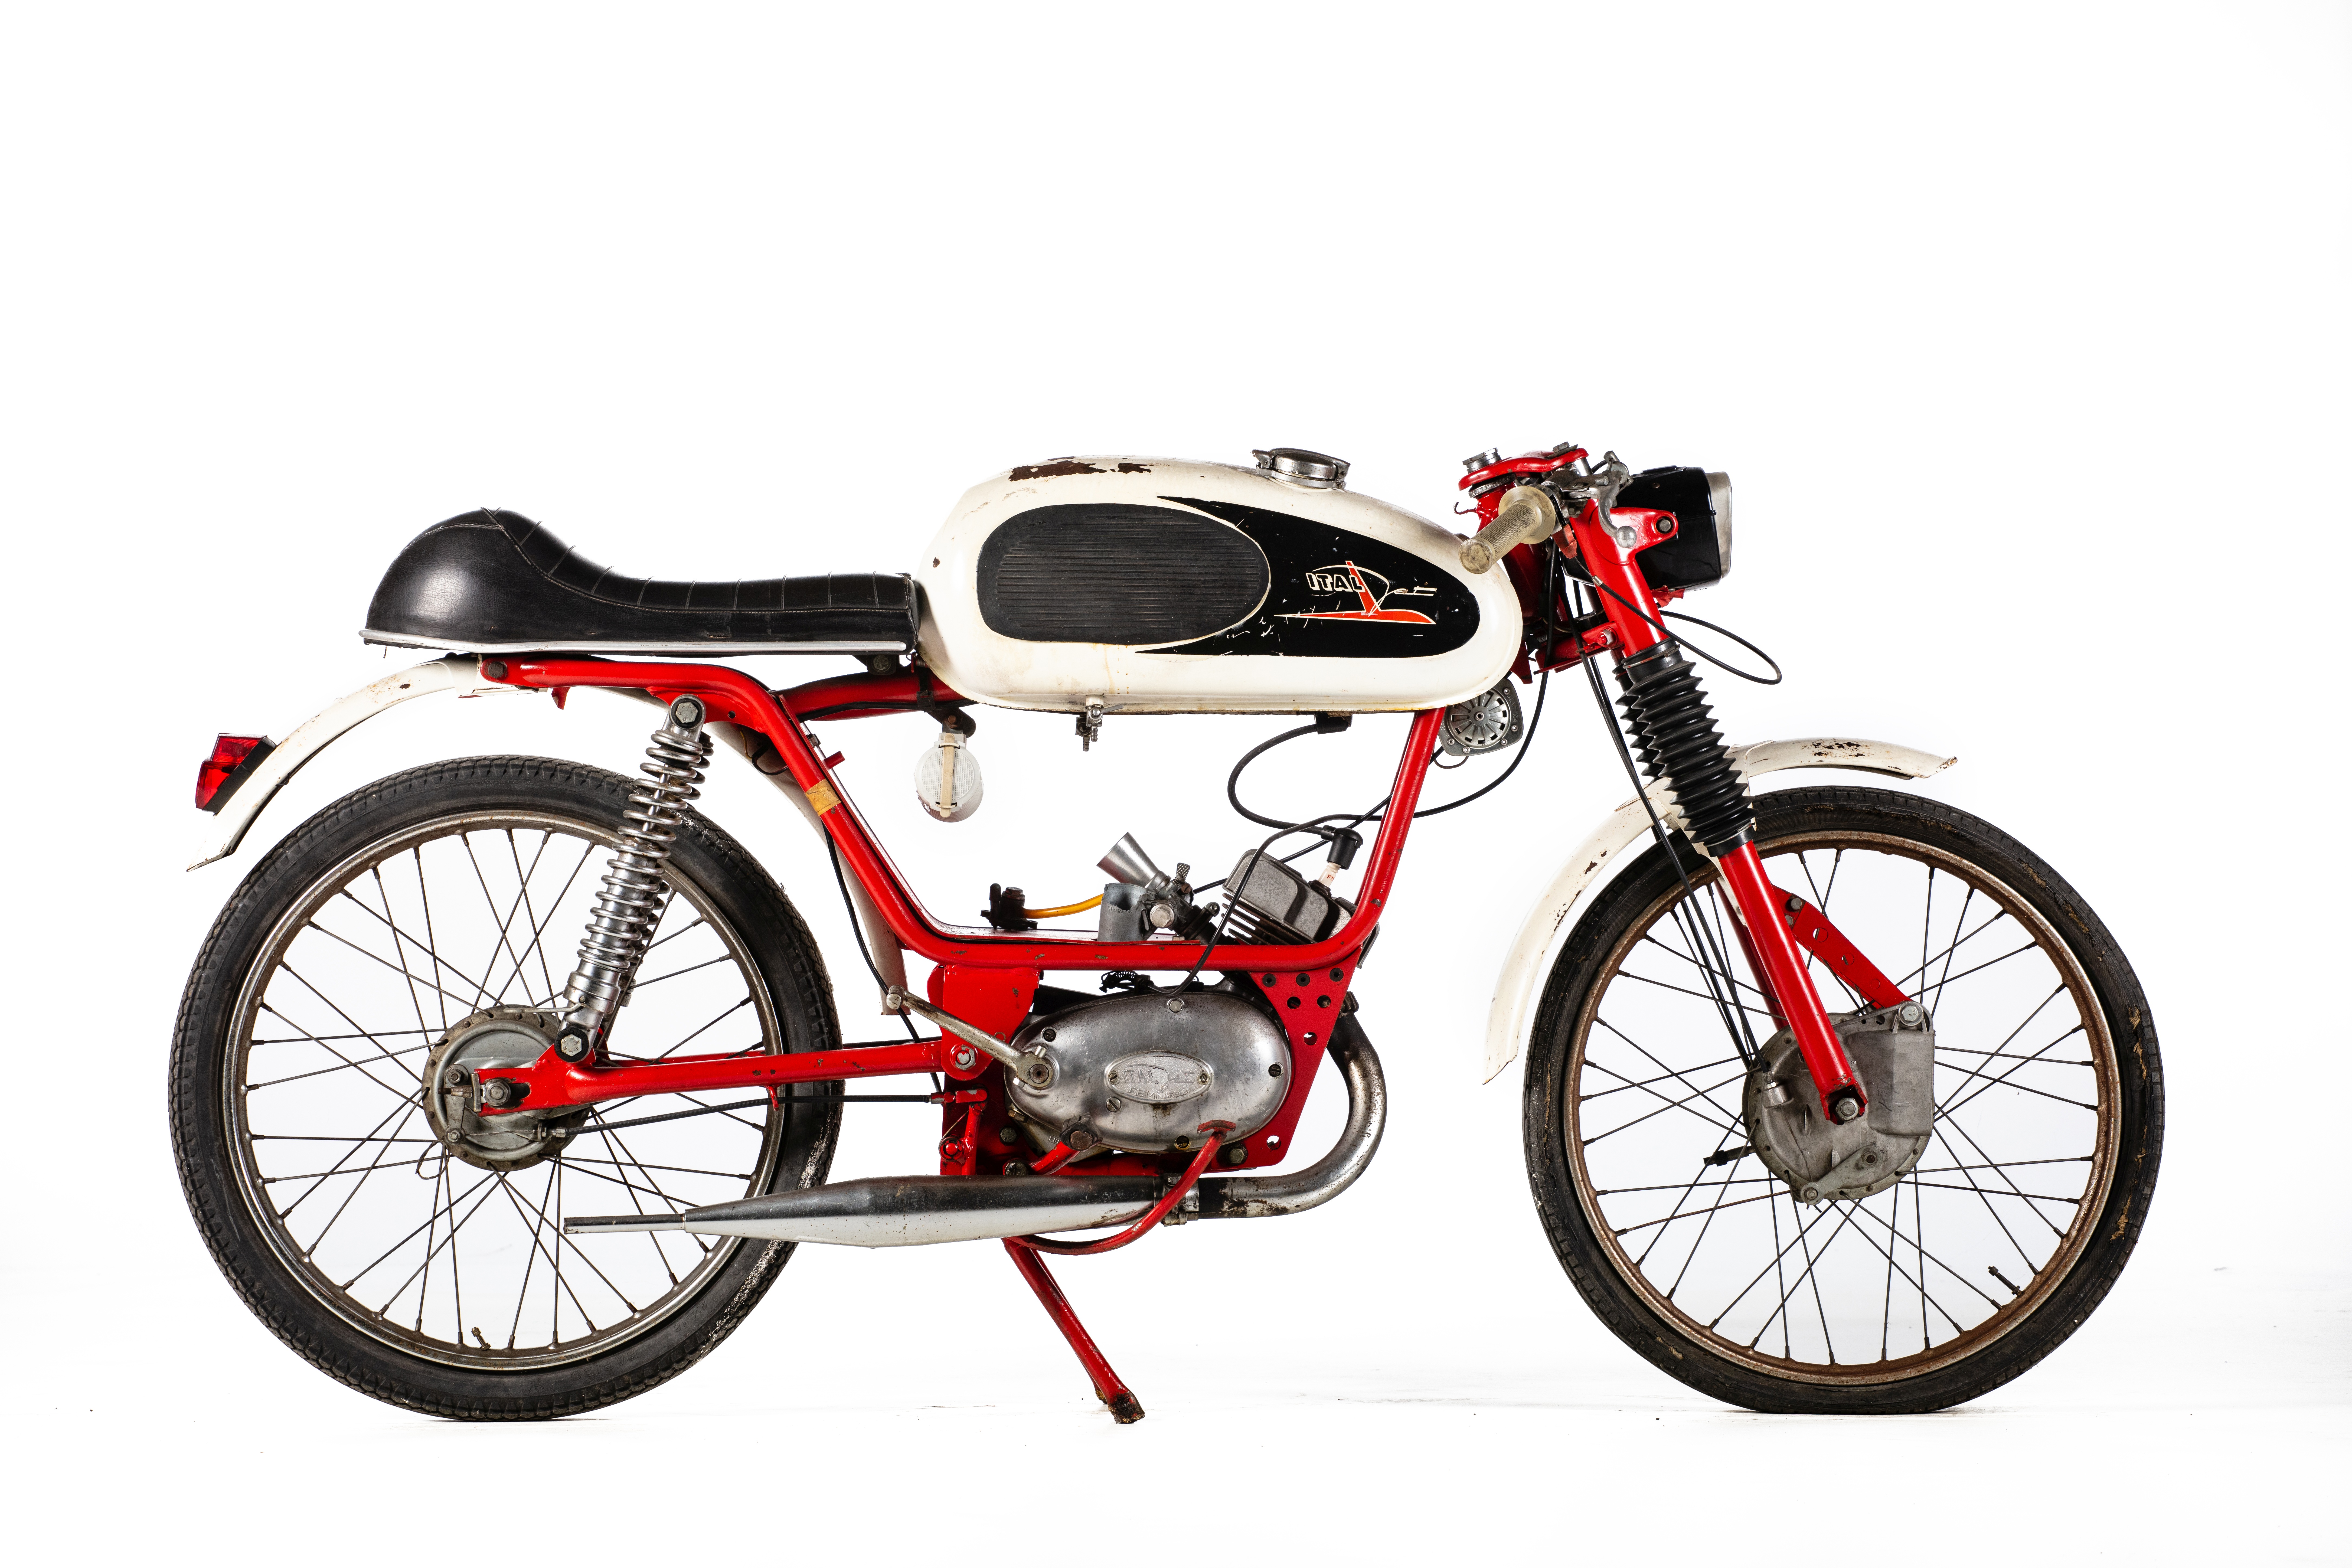 c.1965 Italjet 49cc Sports Roadster Frame no. 25833 Engine no. unable to locate